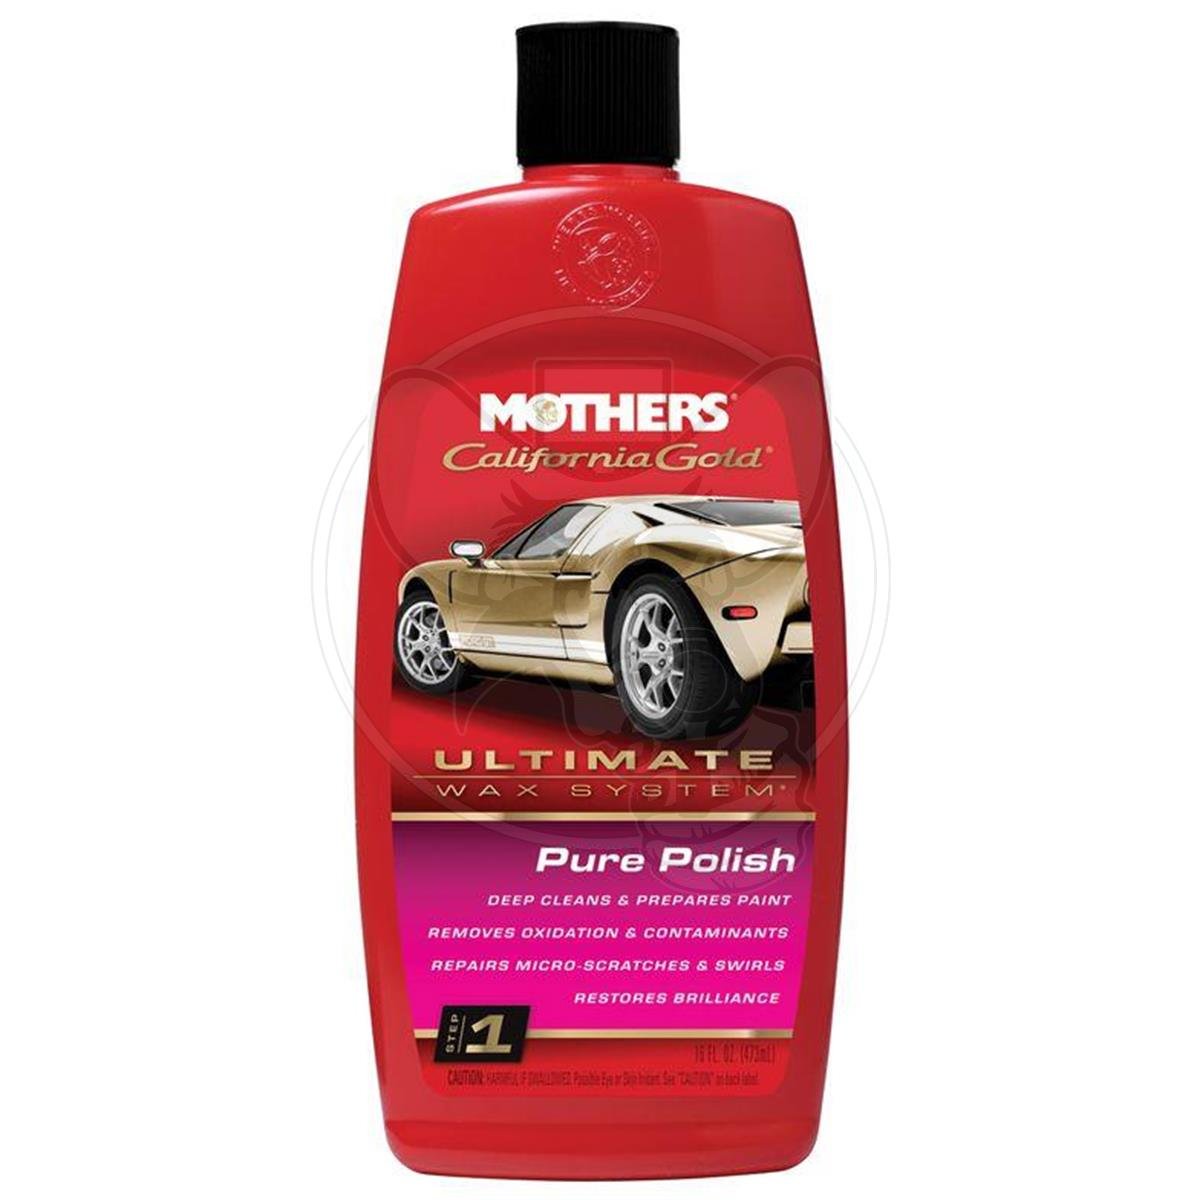 MOTHERS CALIFORNIA GOLD PURE POLISH / PRE WAX CLEANER - 16 OUNCE / 453G